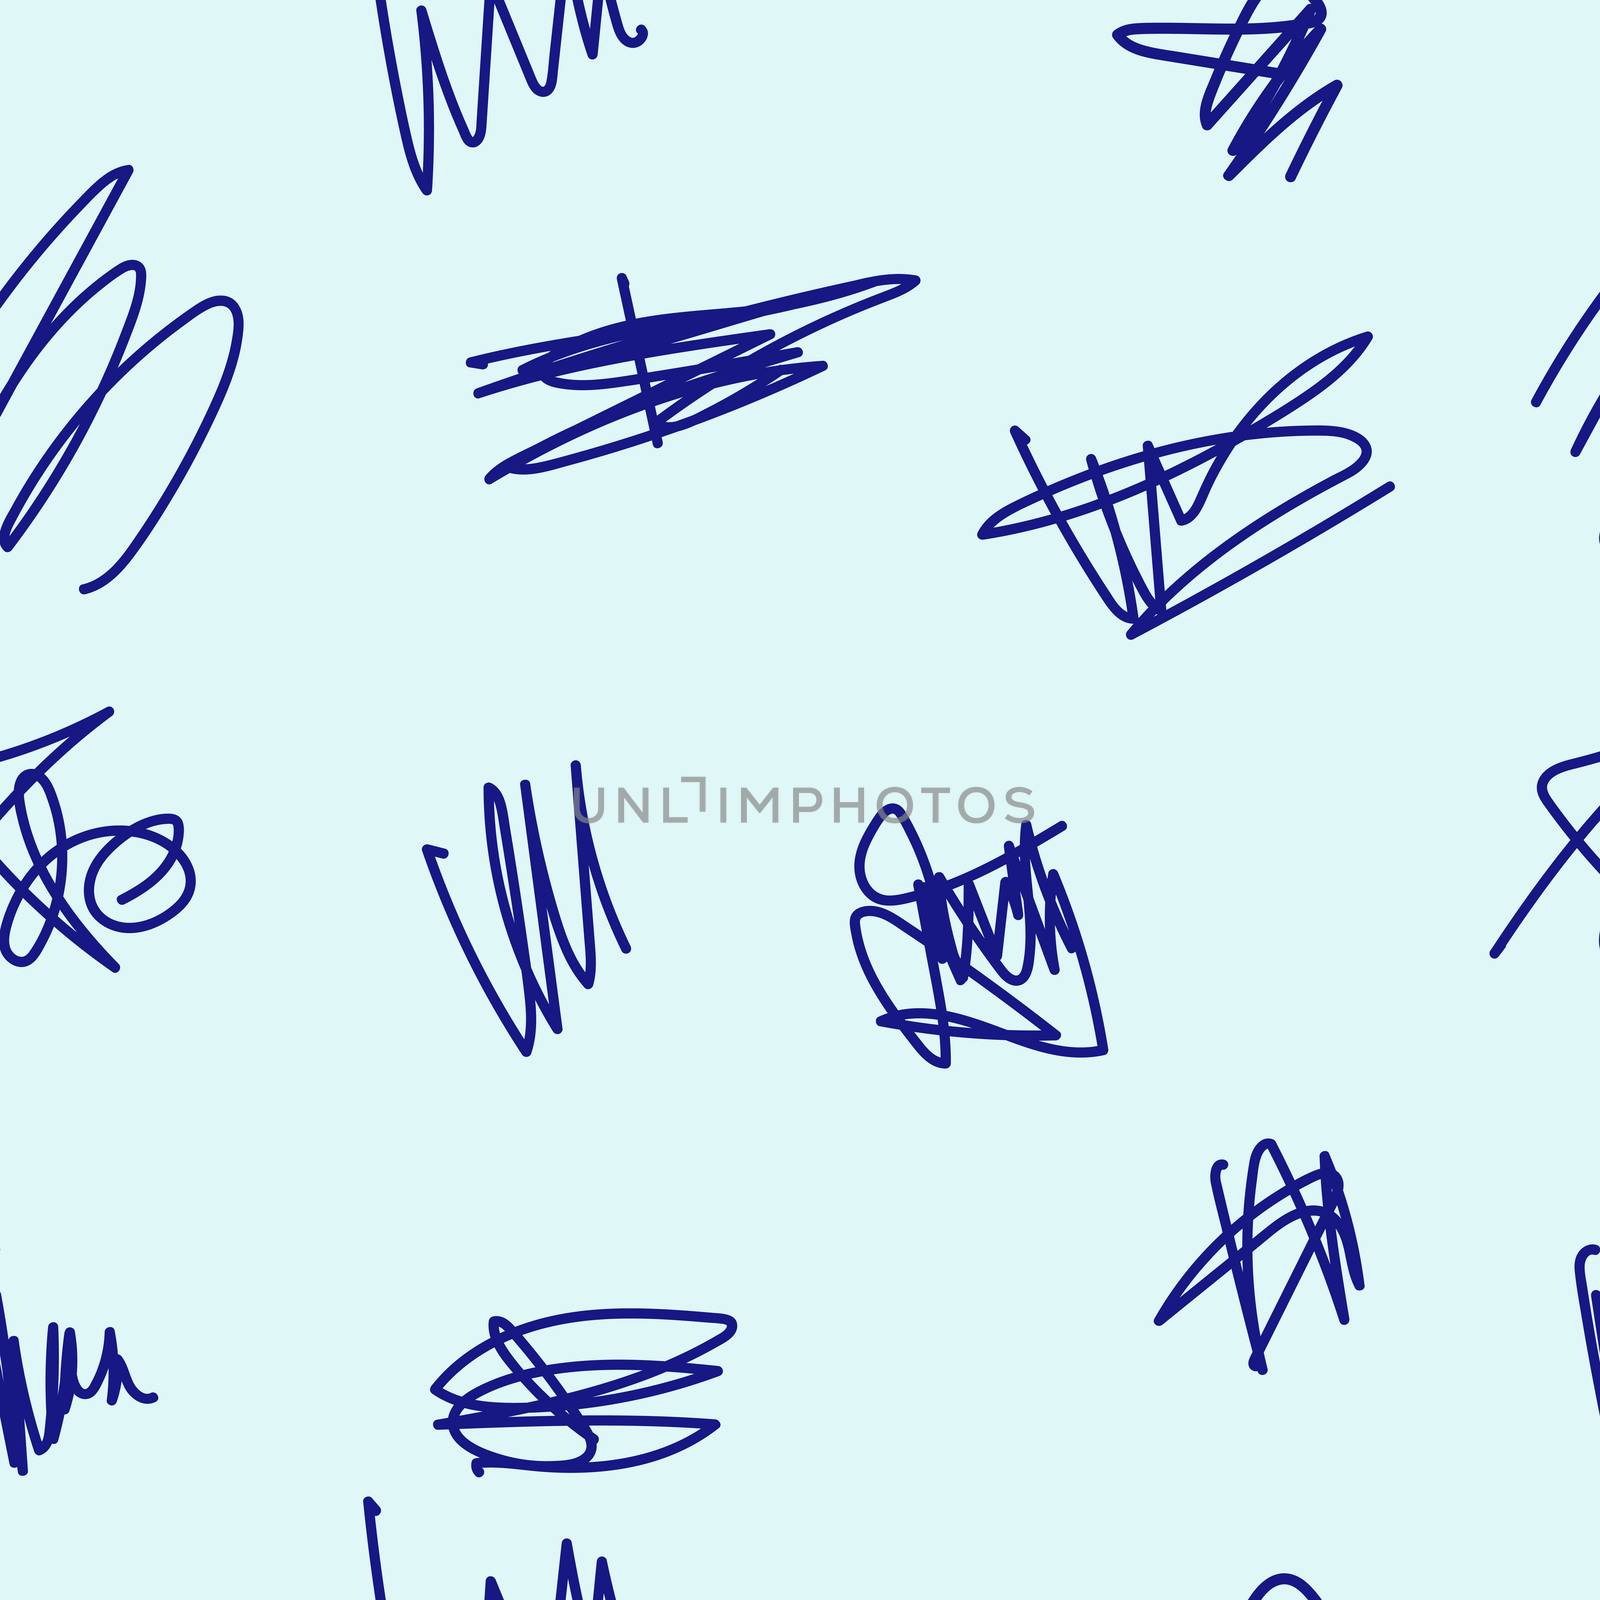 Seamless pattern of hand drawn doodle shapes, design elements. The scribble of a gel pen